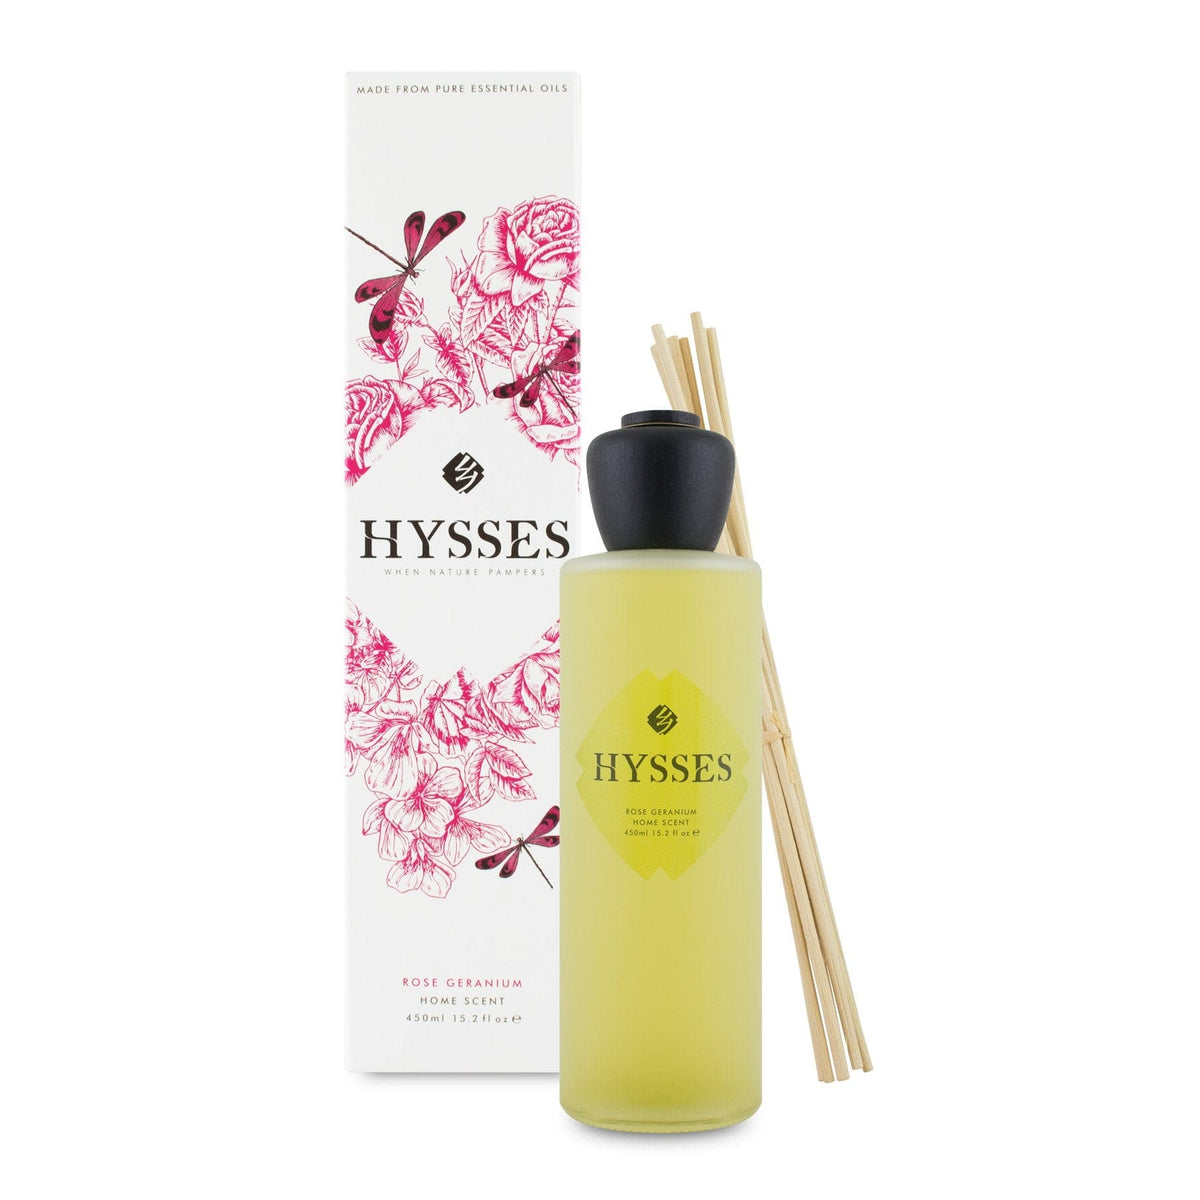 Hysses Home Scents 450ml Home Scent Reed Diffuser Rose Geranium